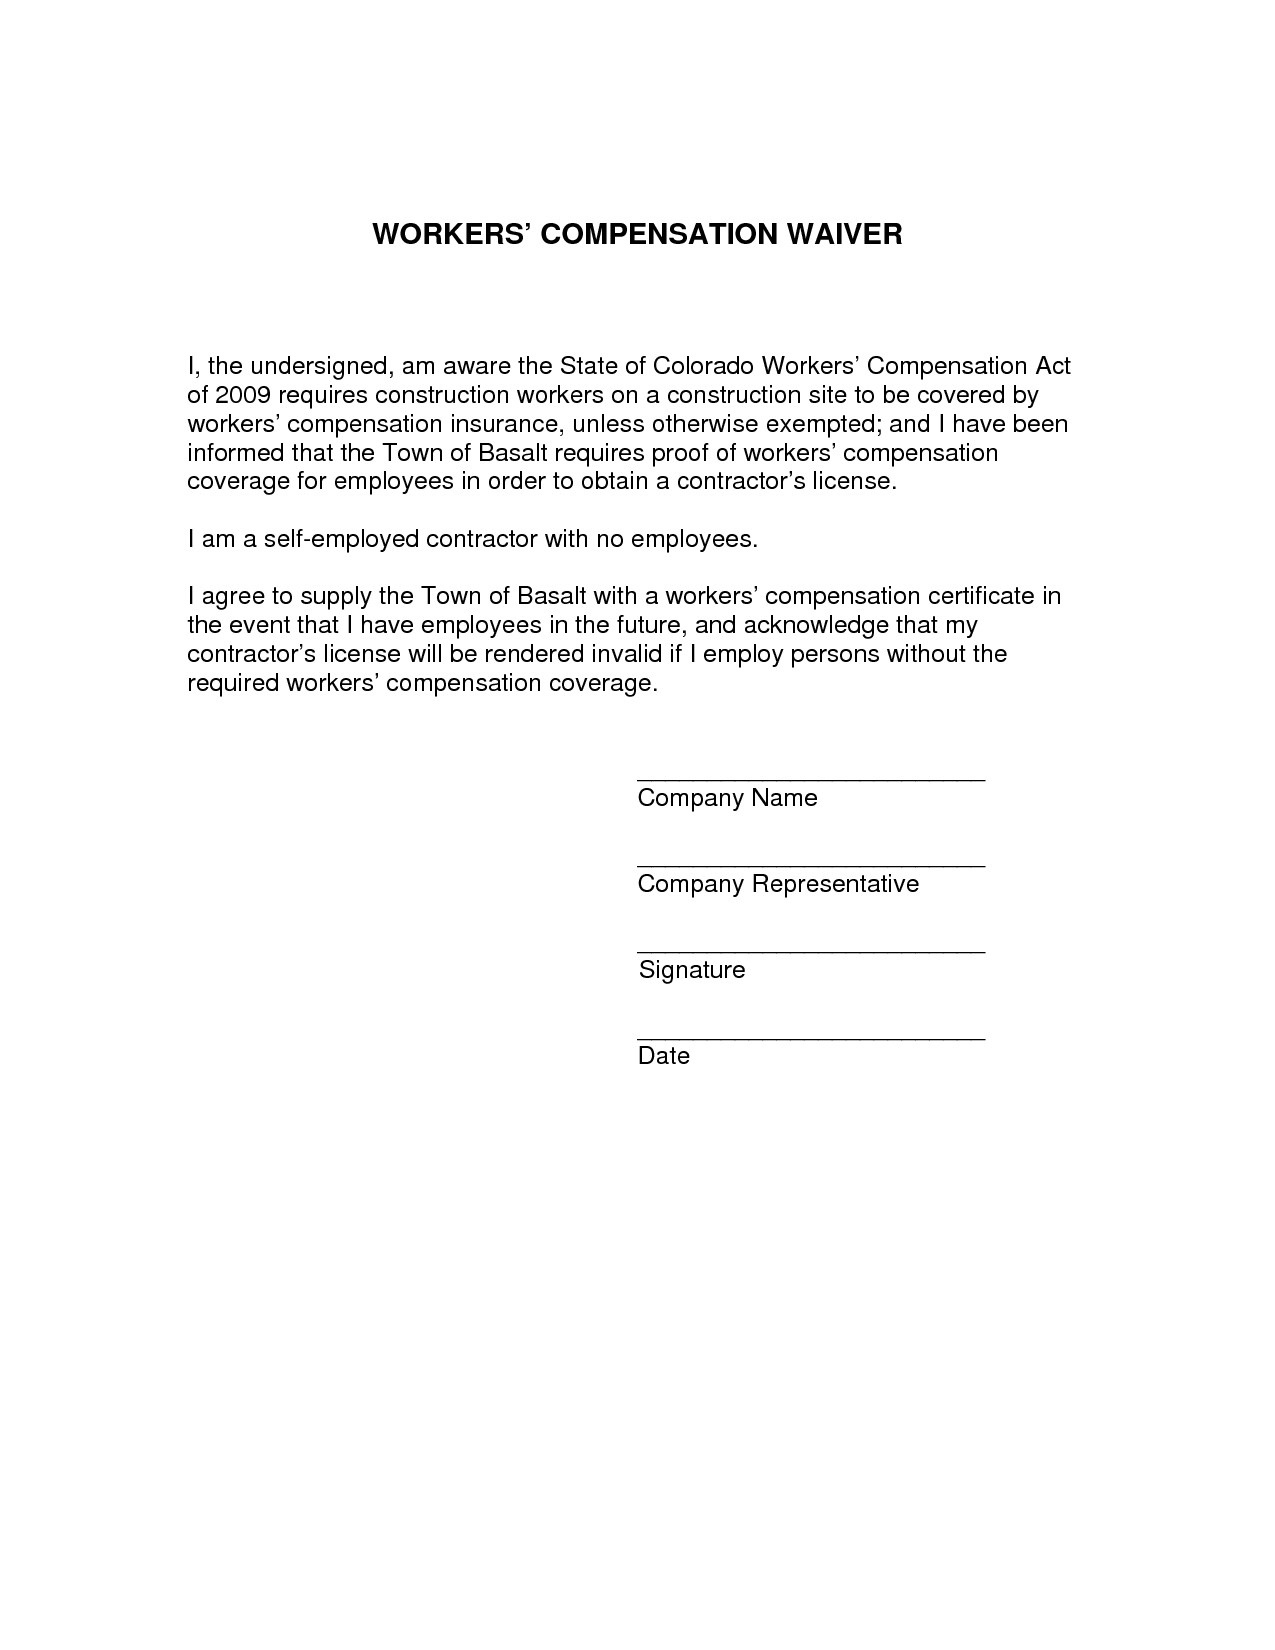 Best s of Arizona Workers pensation Waiver Form